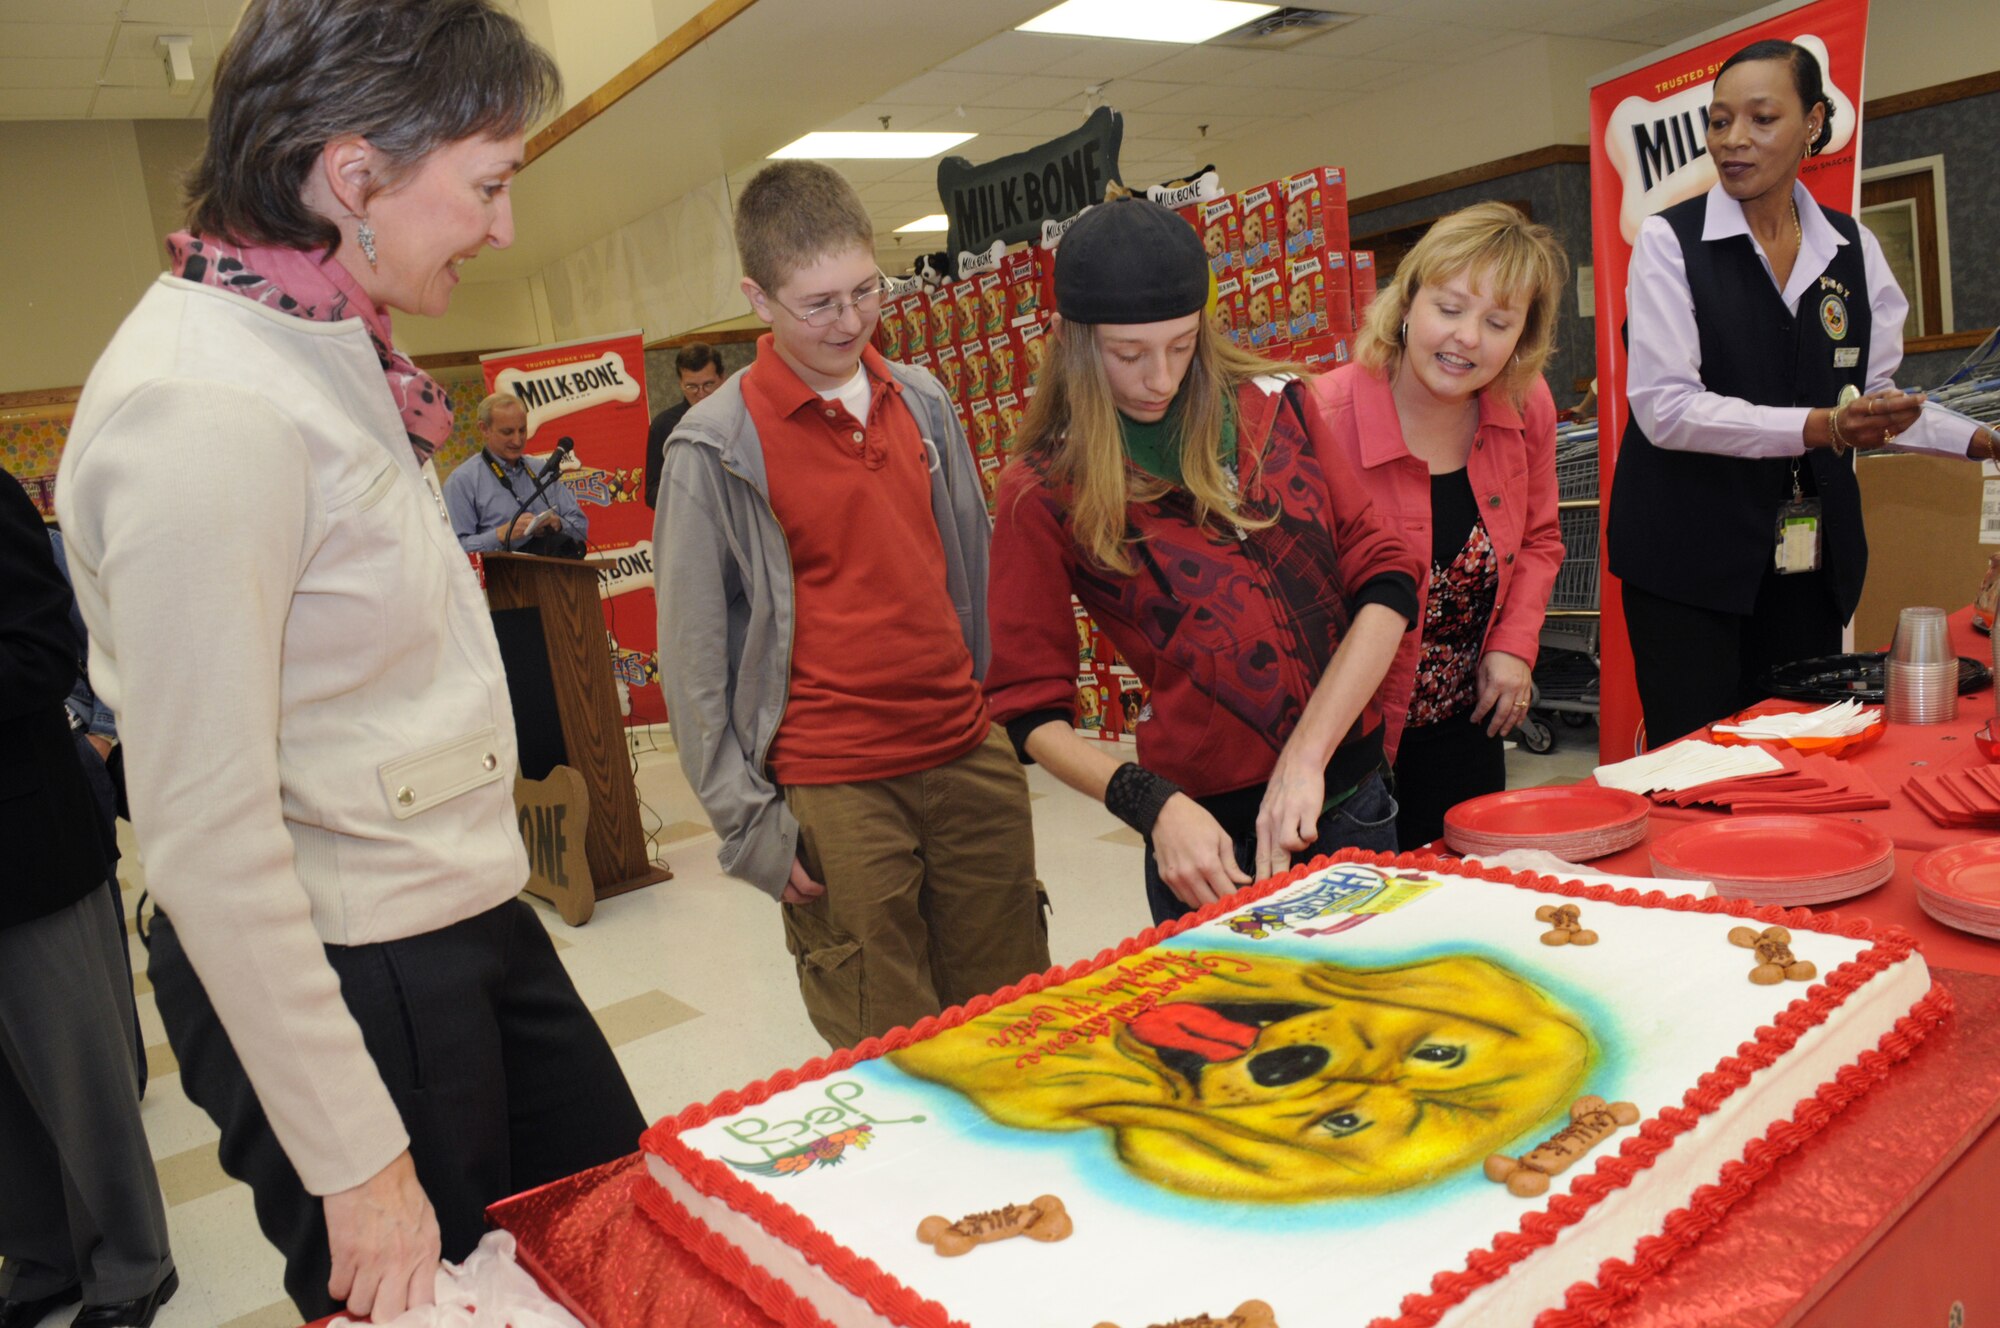 Hayden Martin, center, cuts a cake in his honor at a ceremony at Robins Commissary Feb. 26 as Marie Berry, Connor Martin, Dede Martin and Paula Lewis look on.  Hayden will be getting his own service dog through a partnership between Milk-Bone and the Defense Commissary Agency. U. S. Air Force photo by Sue Sapp